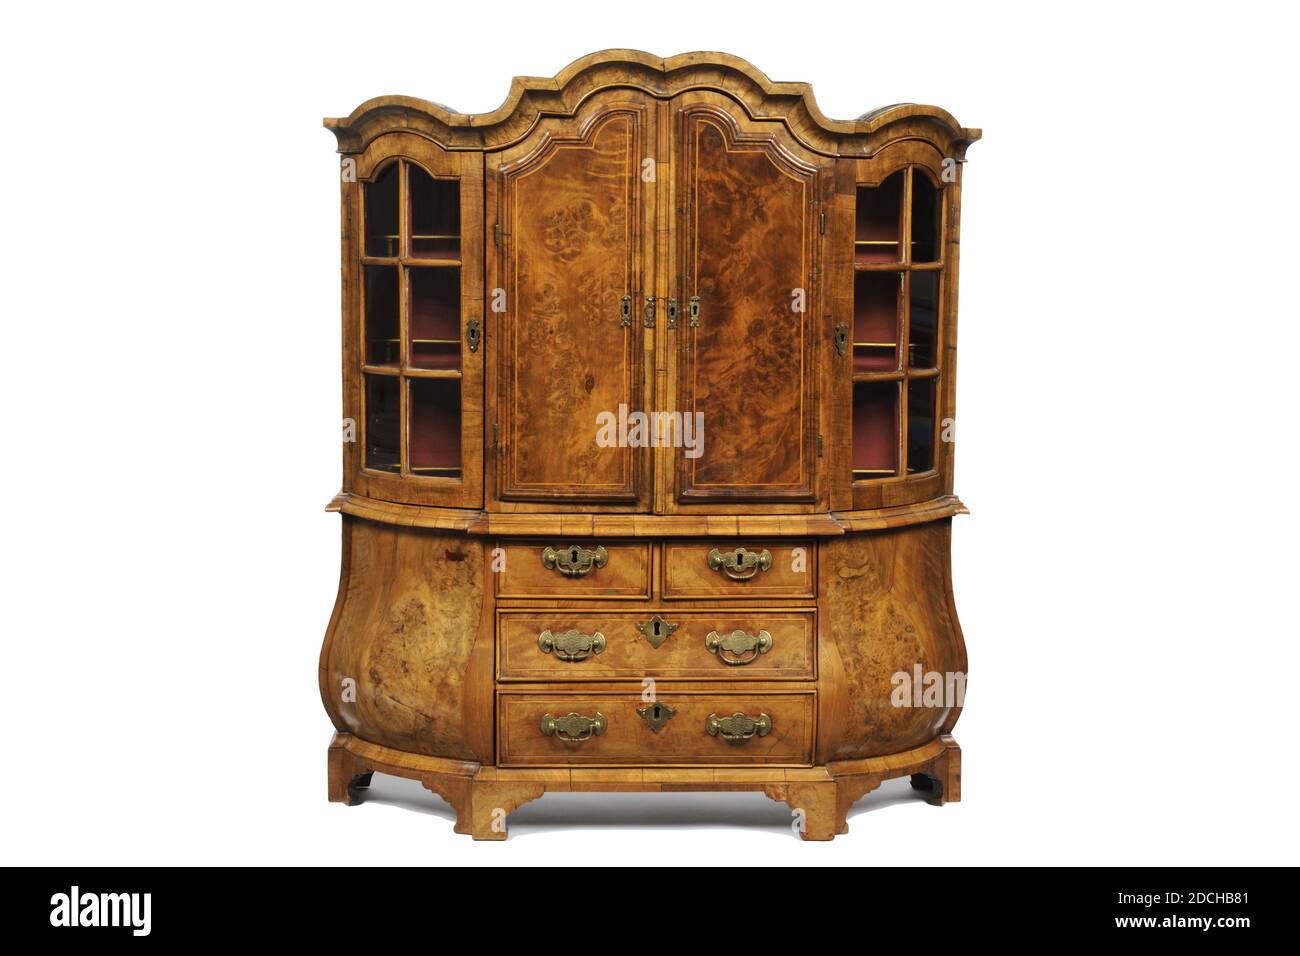 Anonymous, 18th century, glass, burr walnut, oak, brass, General: 69.6 x 61.7 x 19.4cm 696 x 617 x 194mm, Dutch miniature cabinet of oak veneered with burr walnut. The cabinet has curved corners and a curved top. In the frame two full and two half drawers with brass key fittings and two handles. The top frame has a double set of doors at the front, one set is closed and the second set is made of glass. Behind this three whole and a half boards, and three separate drawers. Under the two drawers on the corners is a secret drawer, which can be pulled out with a green ribbon. On both corners a Stock Photo